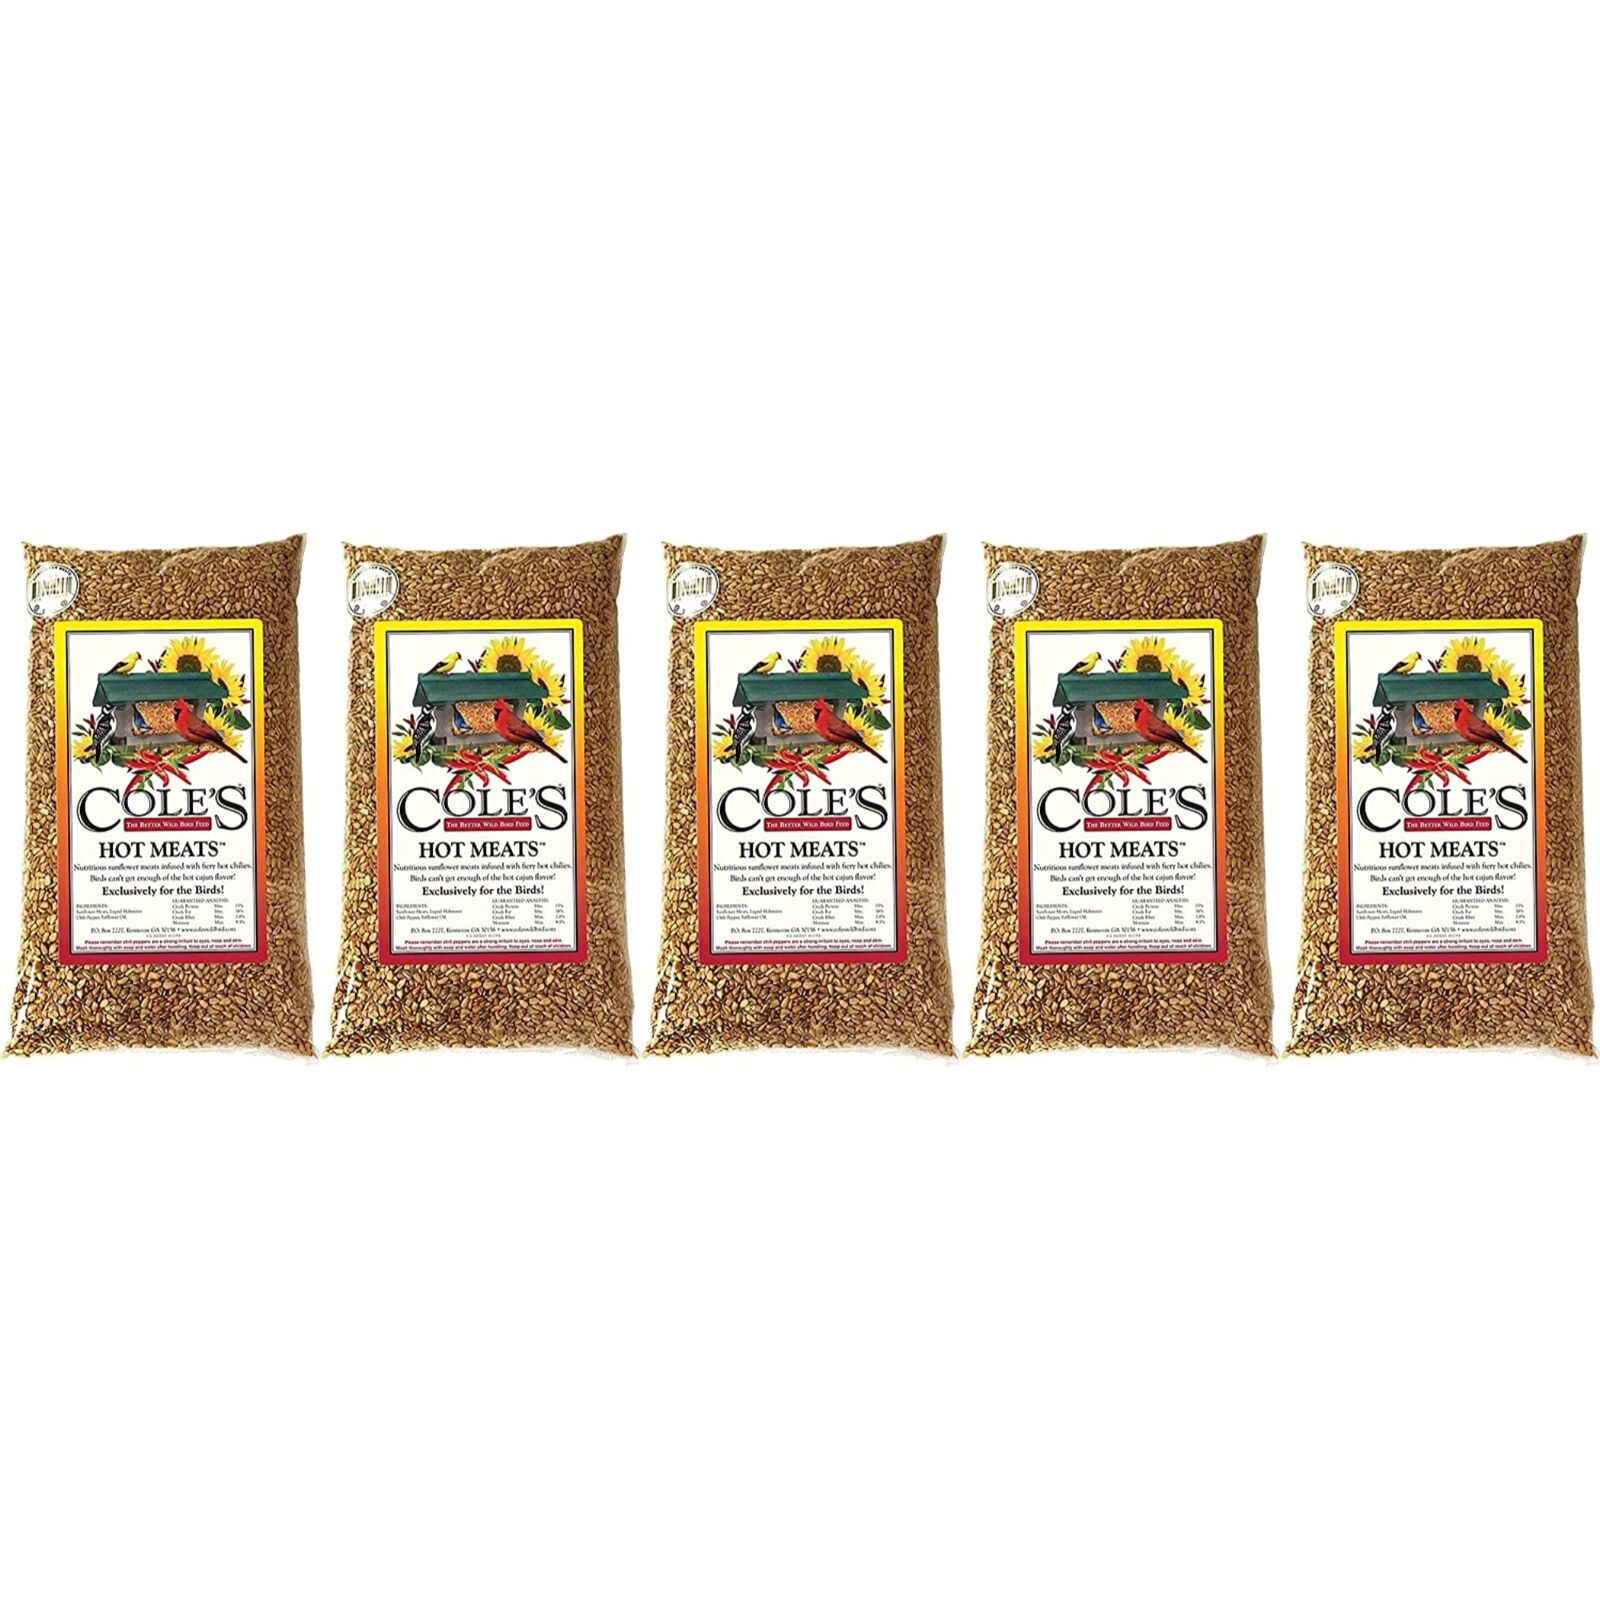 Cole's HM20 Hot Meats Bird Seed, 20-Pound, Pack of 5